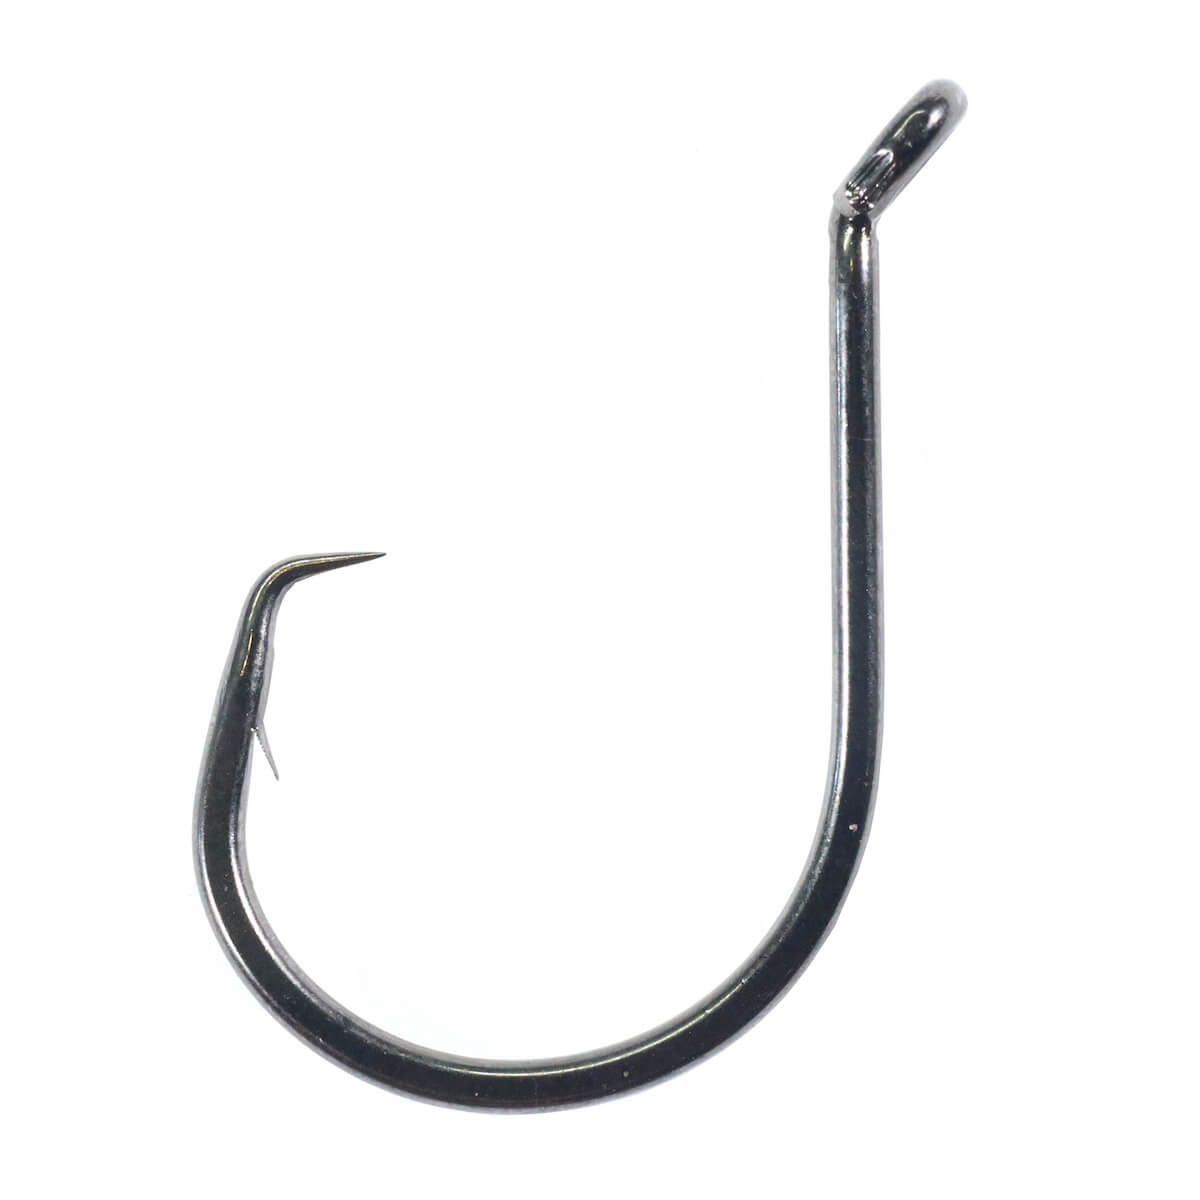 Pro-X PX49Z 3/0 Wide Round Bend Offset Worm Hook, Forged, Sz 3/0